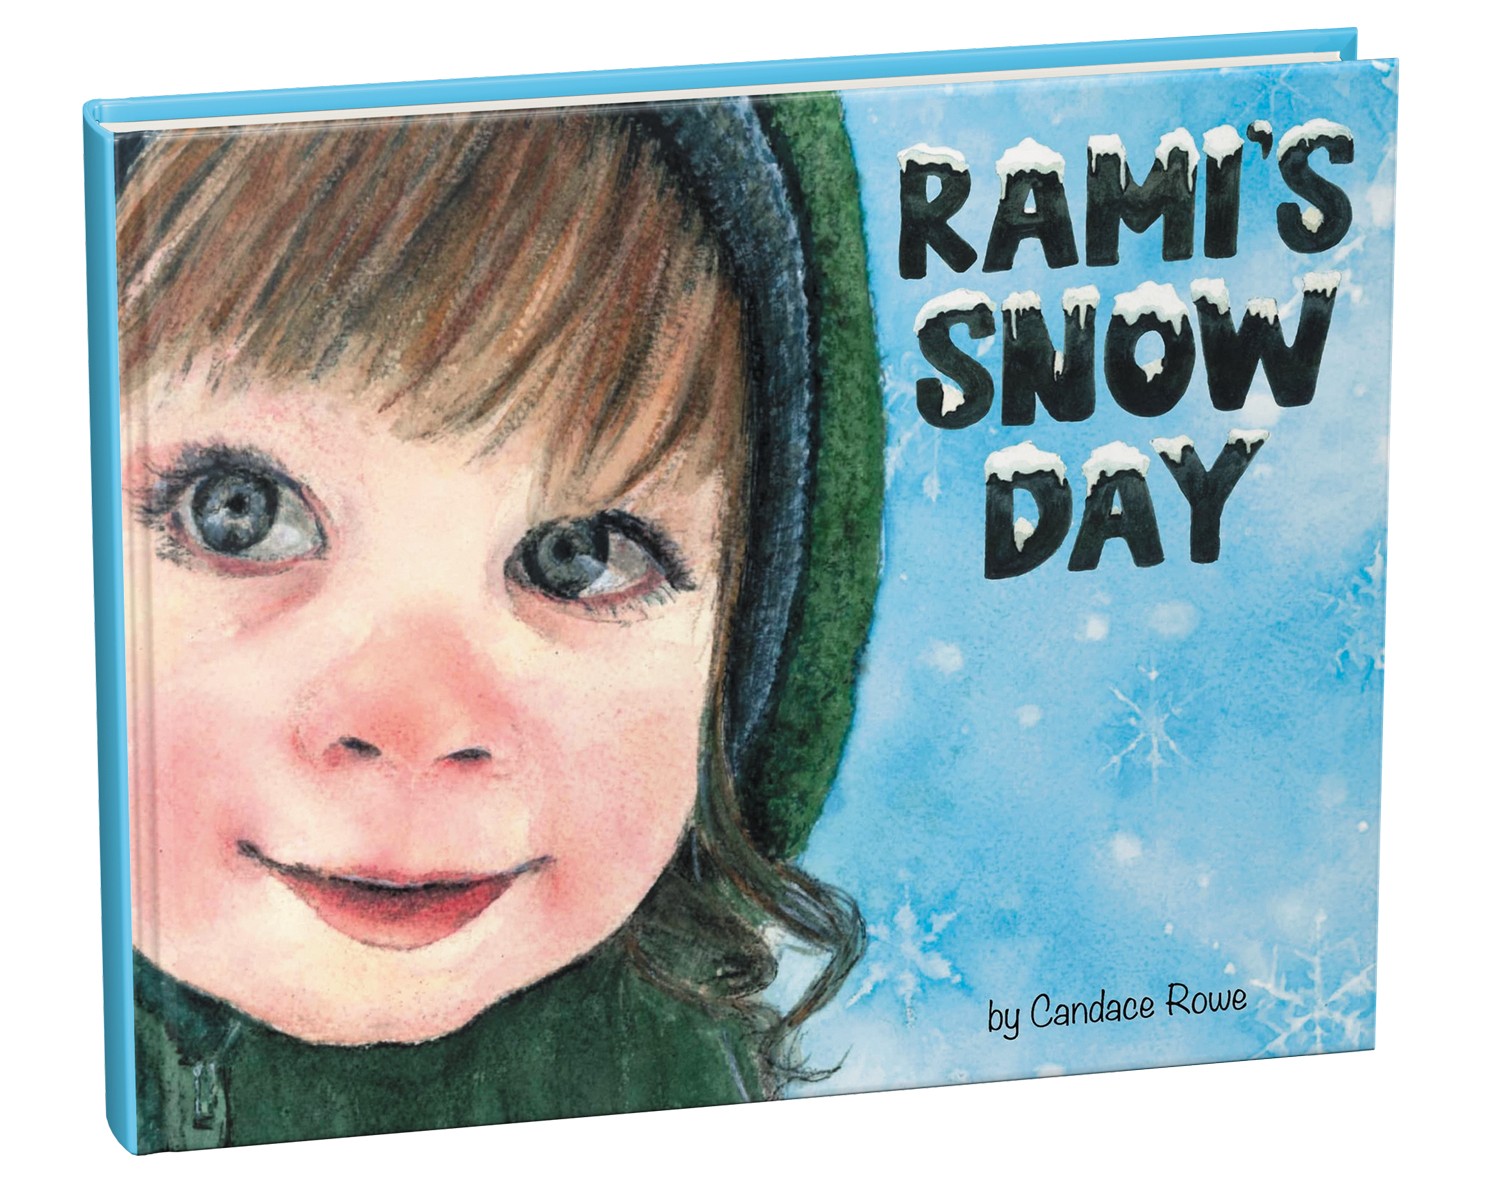 Spokane Artist Candace Rowe's first book, Rami's Snow Day, will warm the hearts of parents and kids